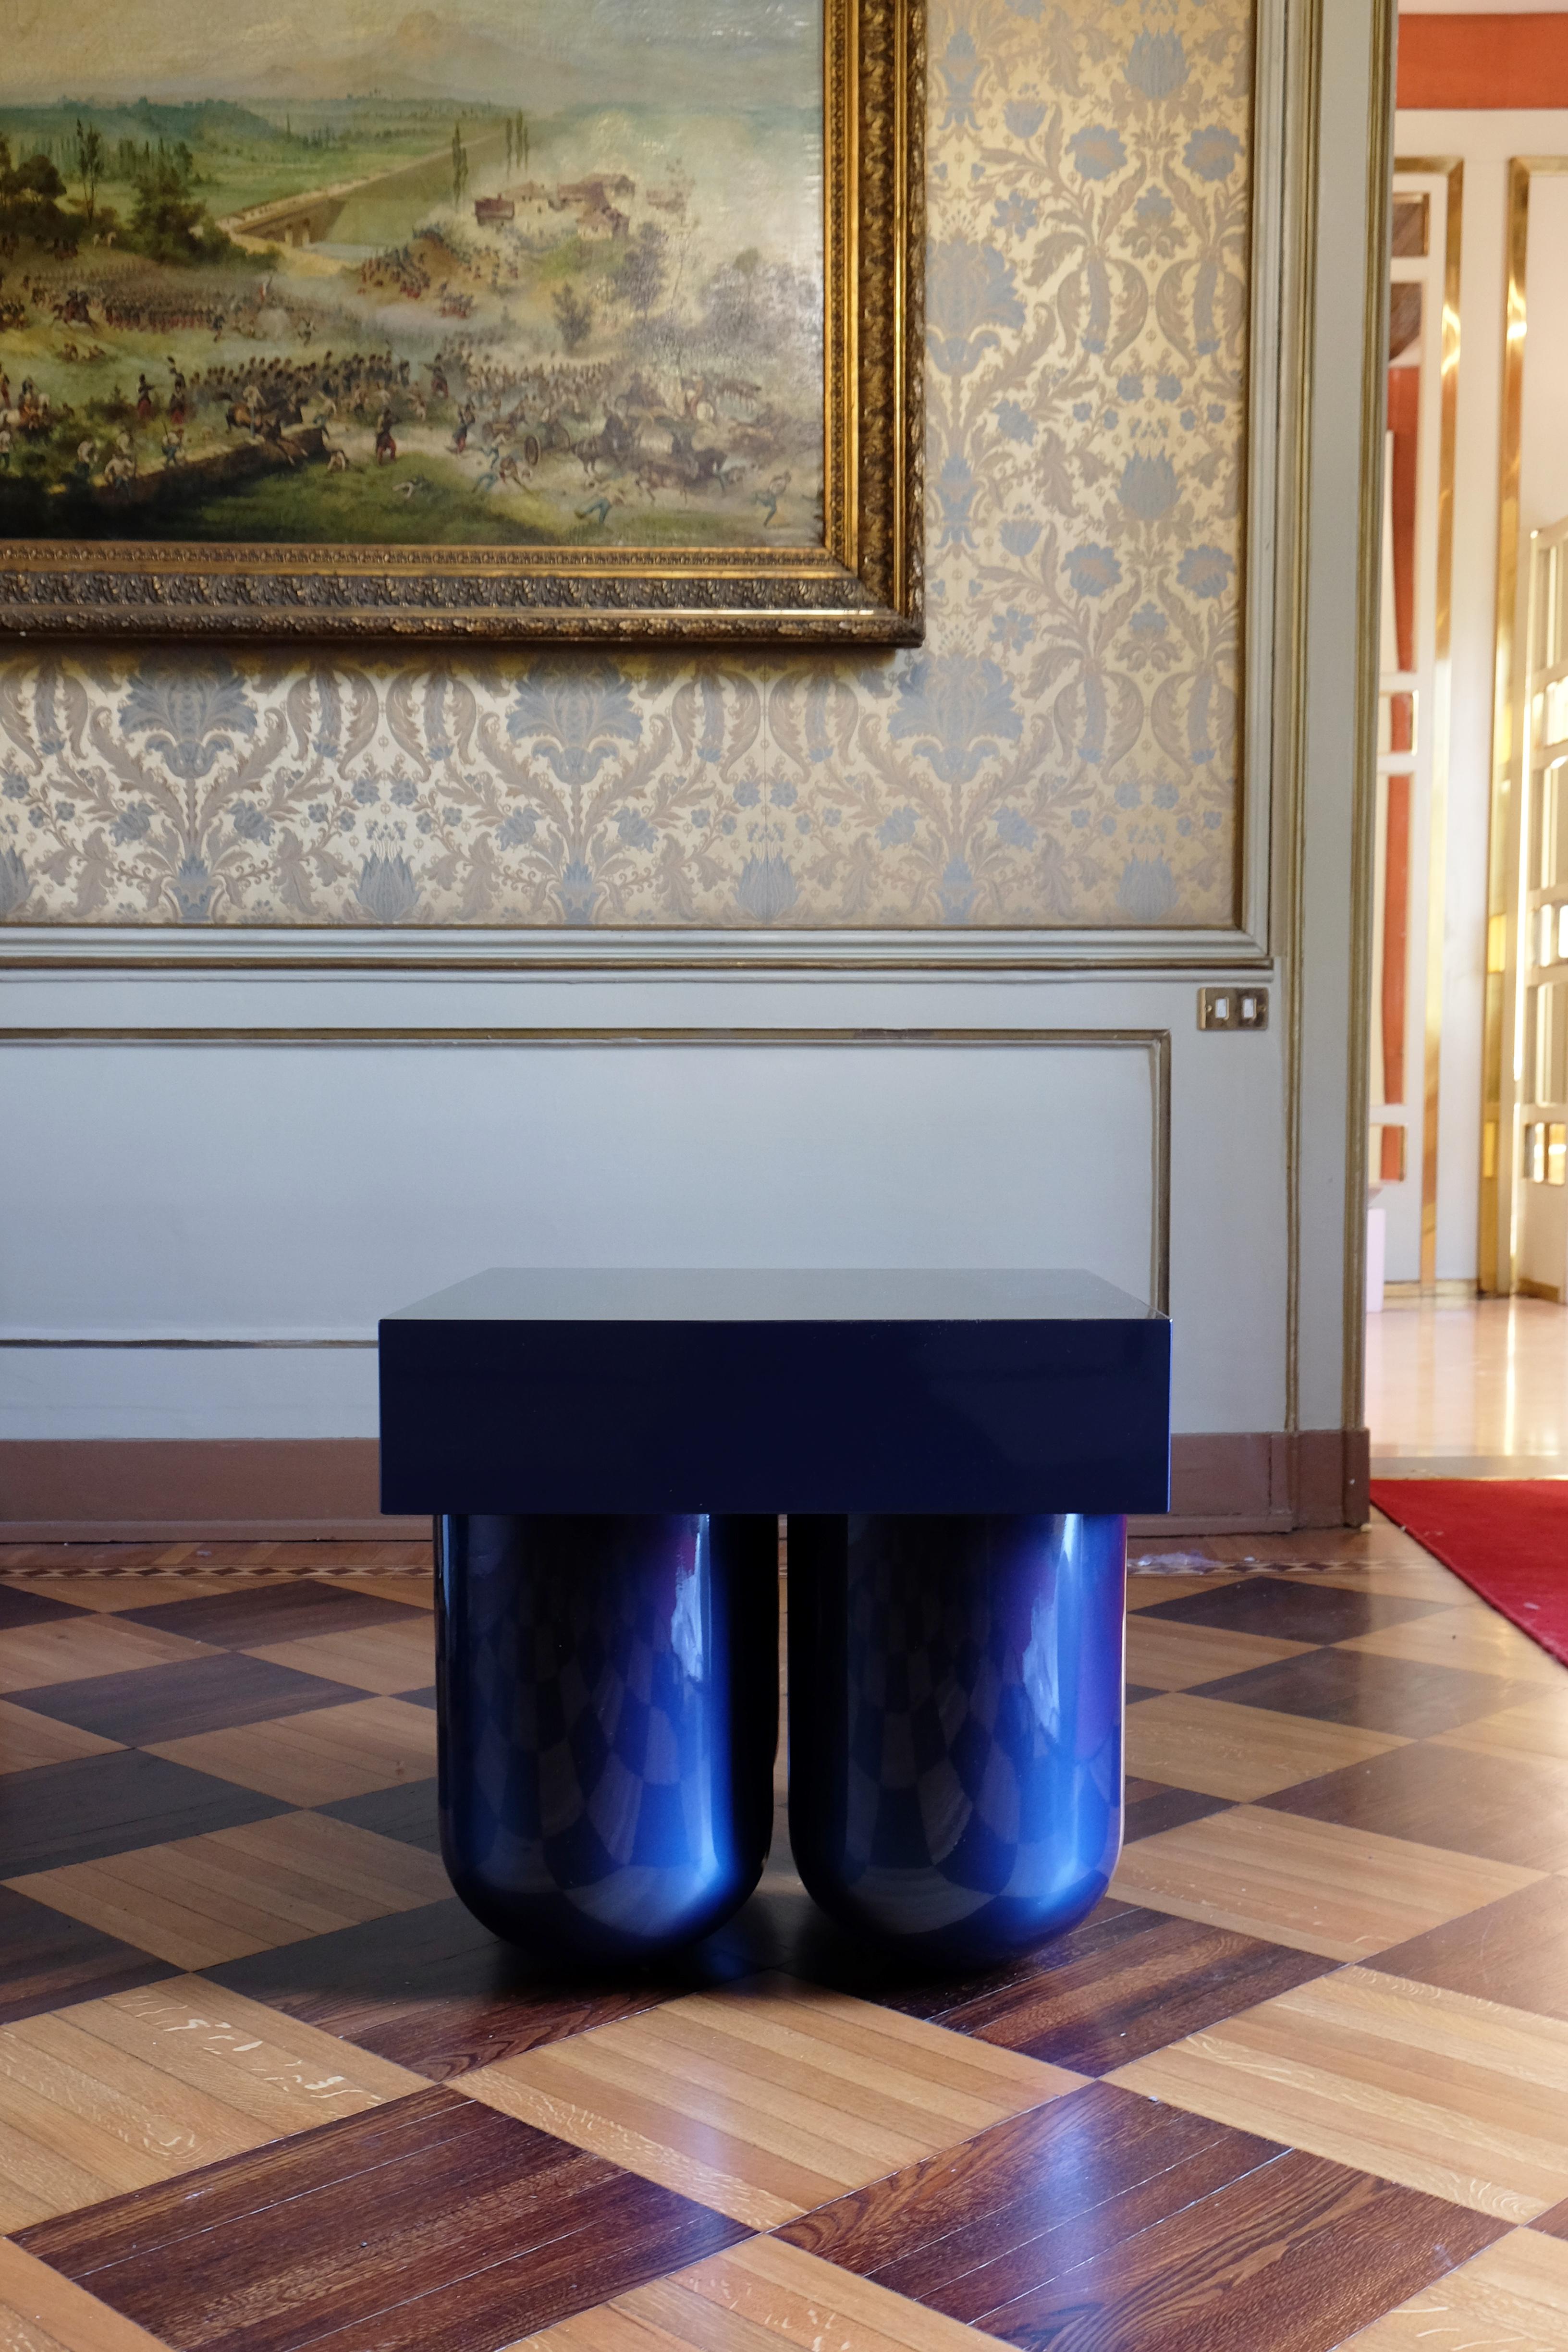 Blue carved wood set no. 5 table by Müsing-Sellés
Dimensions: W 60 x D 60 x H 60 cm
Materials: Carved wood, high gloss car-paint metallic lacquer

Color finish options: Maroon or red gradient
 Indigo or blue gradient
Ccustom color (additional